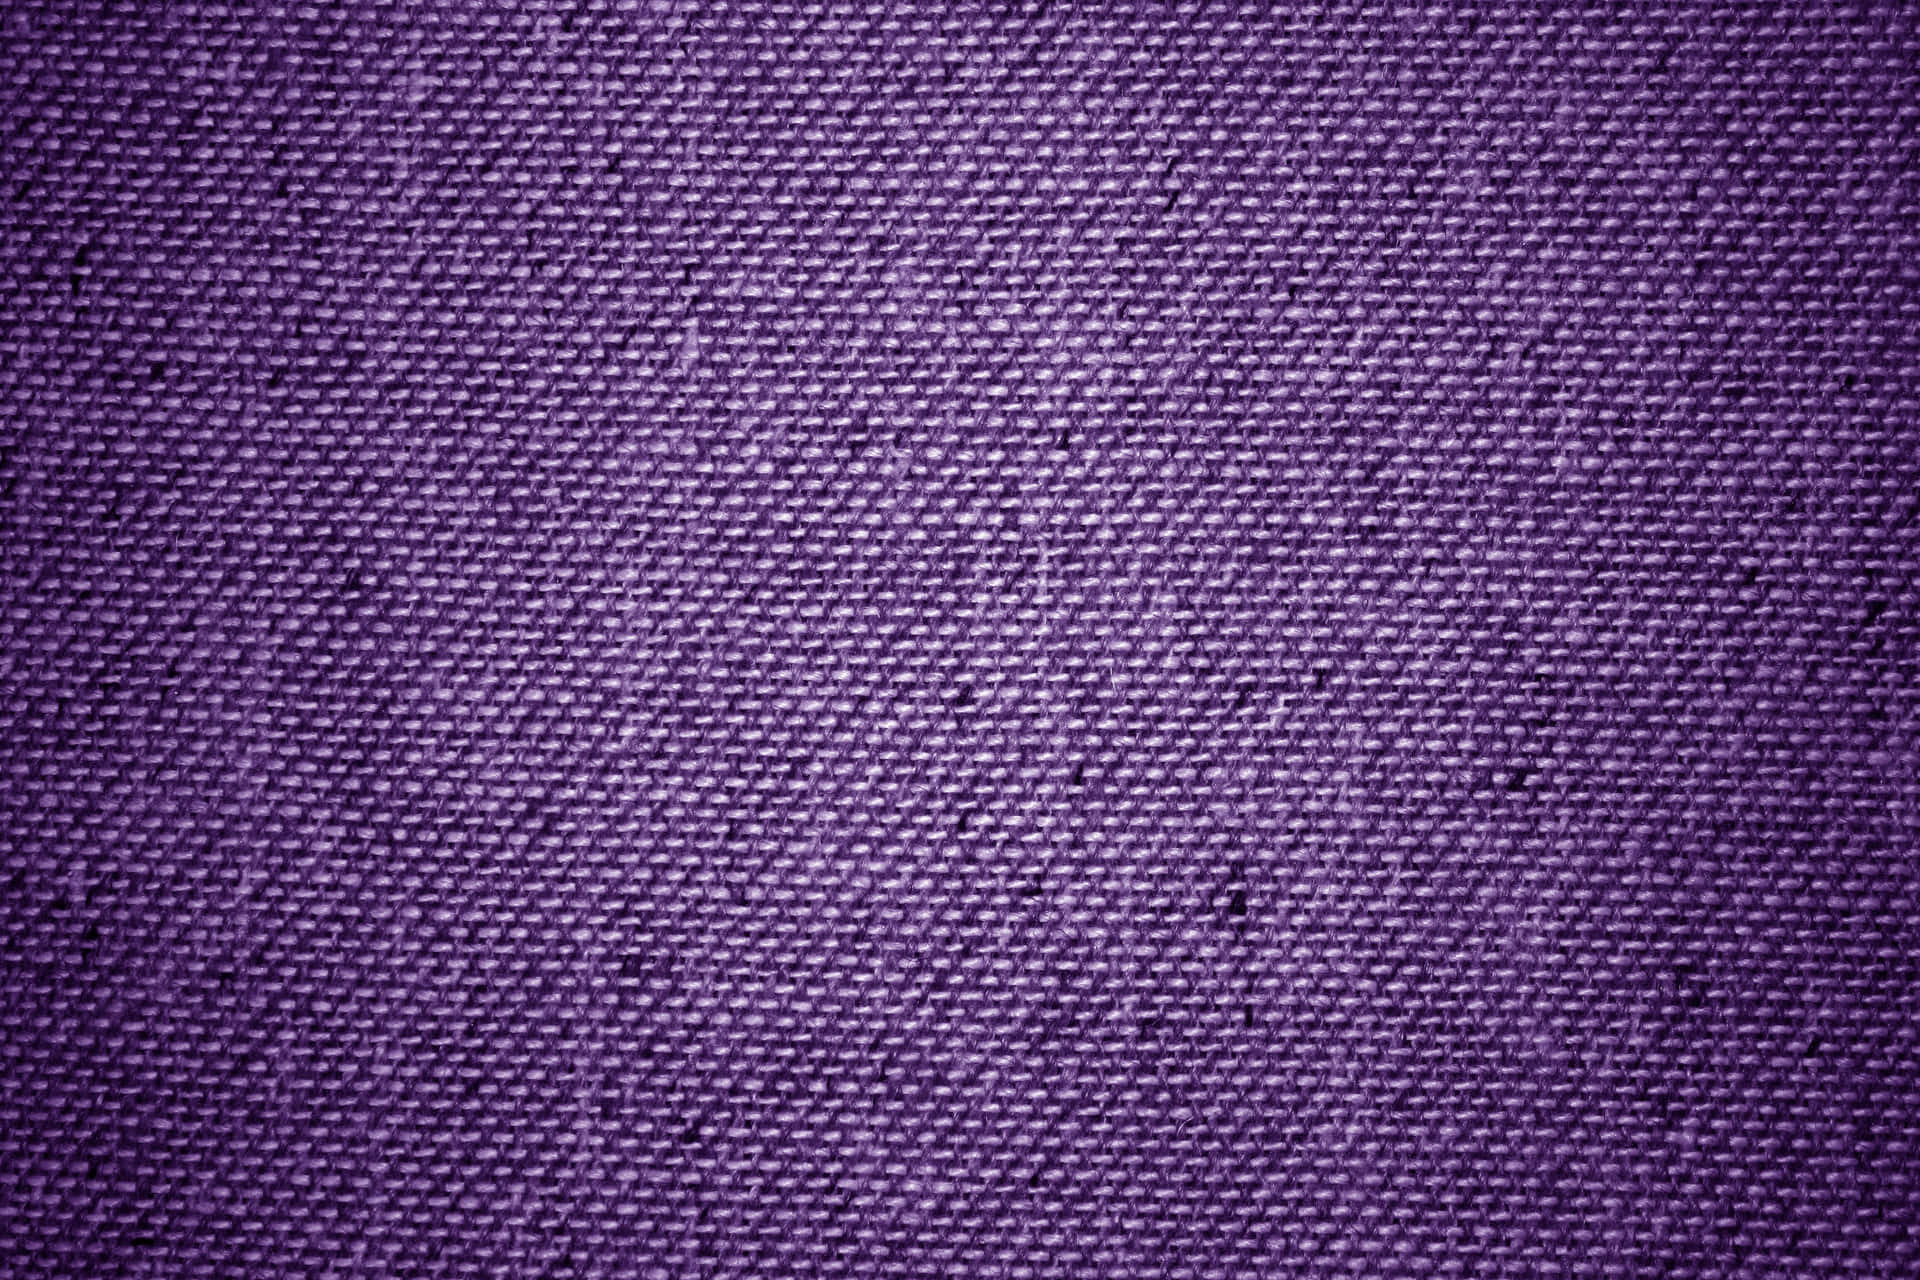 ￼ Soft and Luxurious Purple Fabrics for Your Home Decor Wallpaper